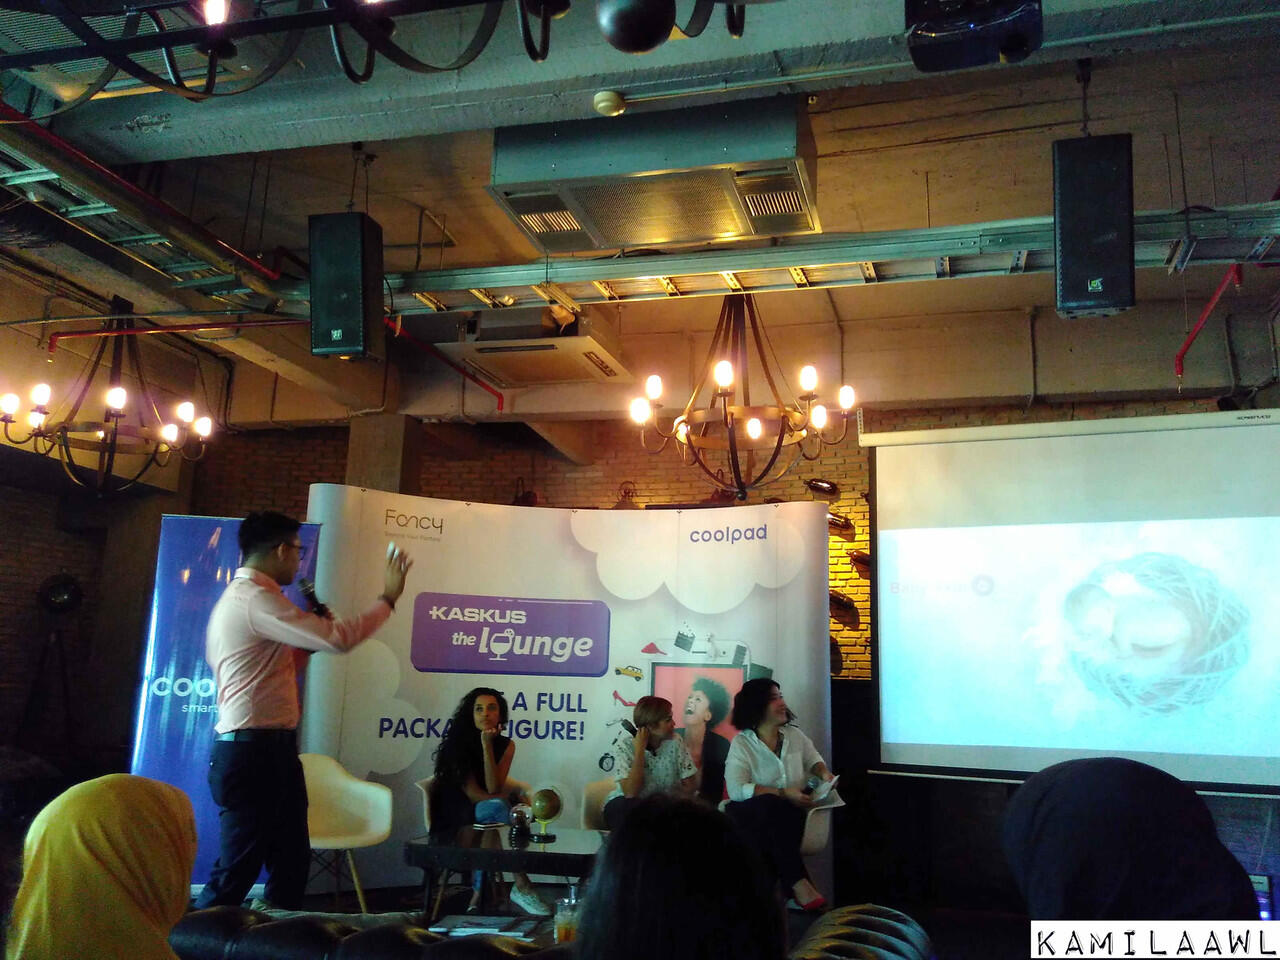 FR KASKUS The Lounge with COOLPAD